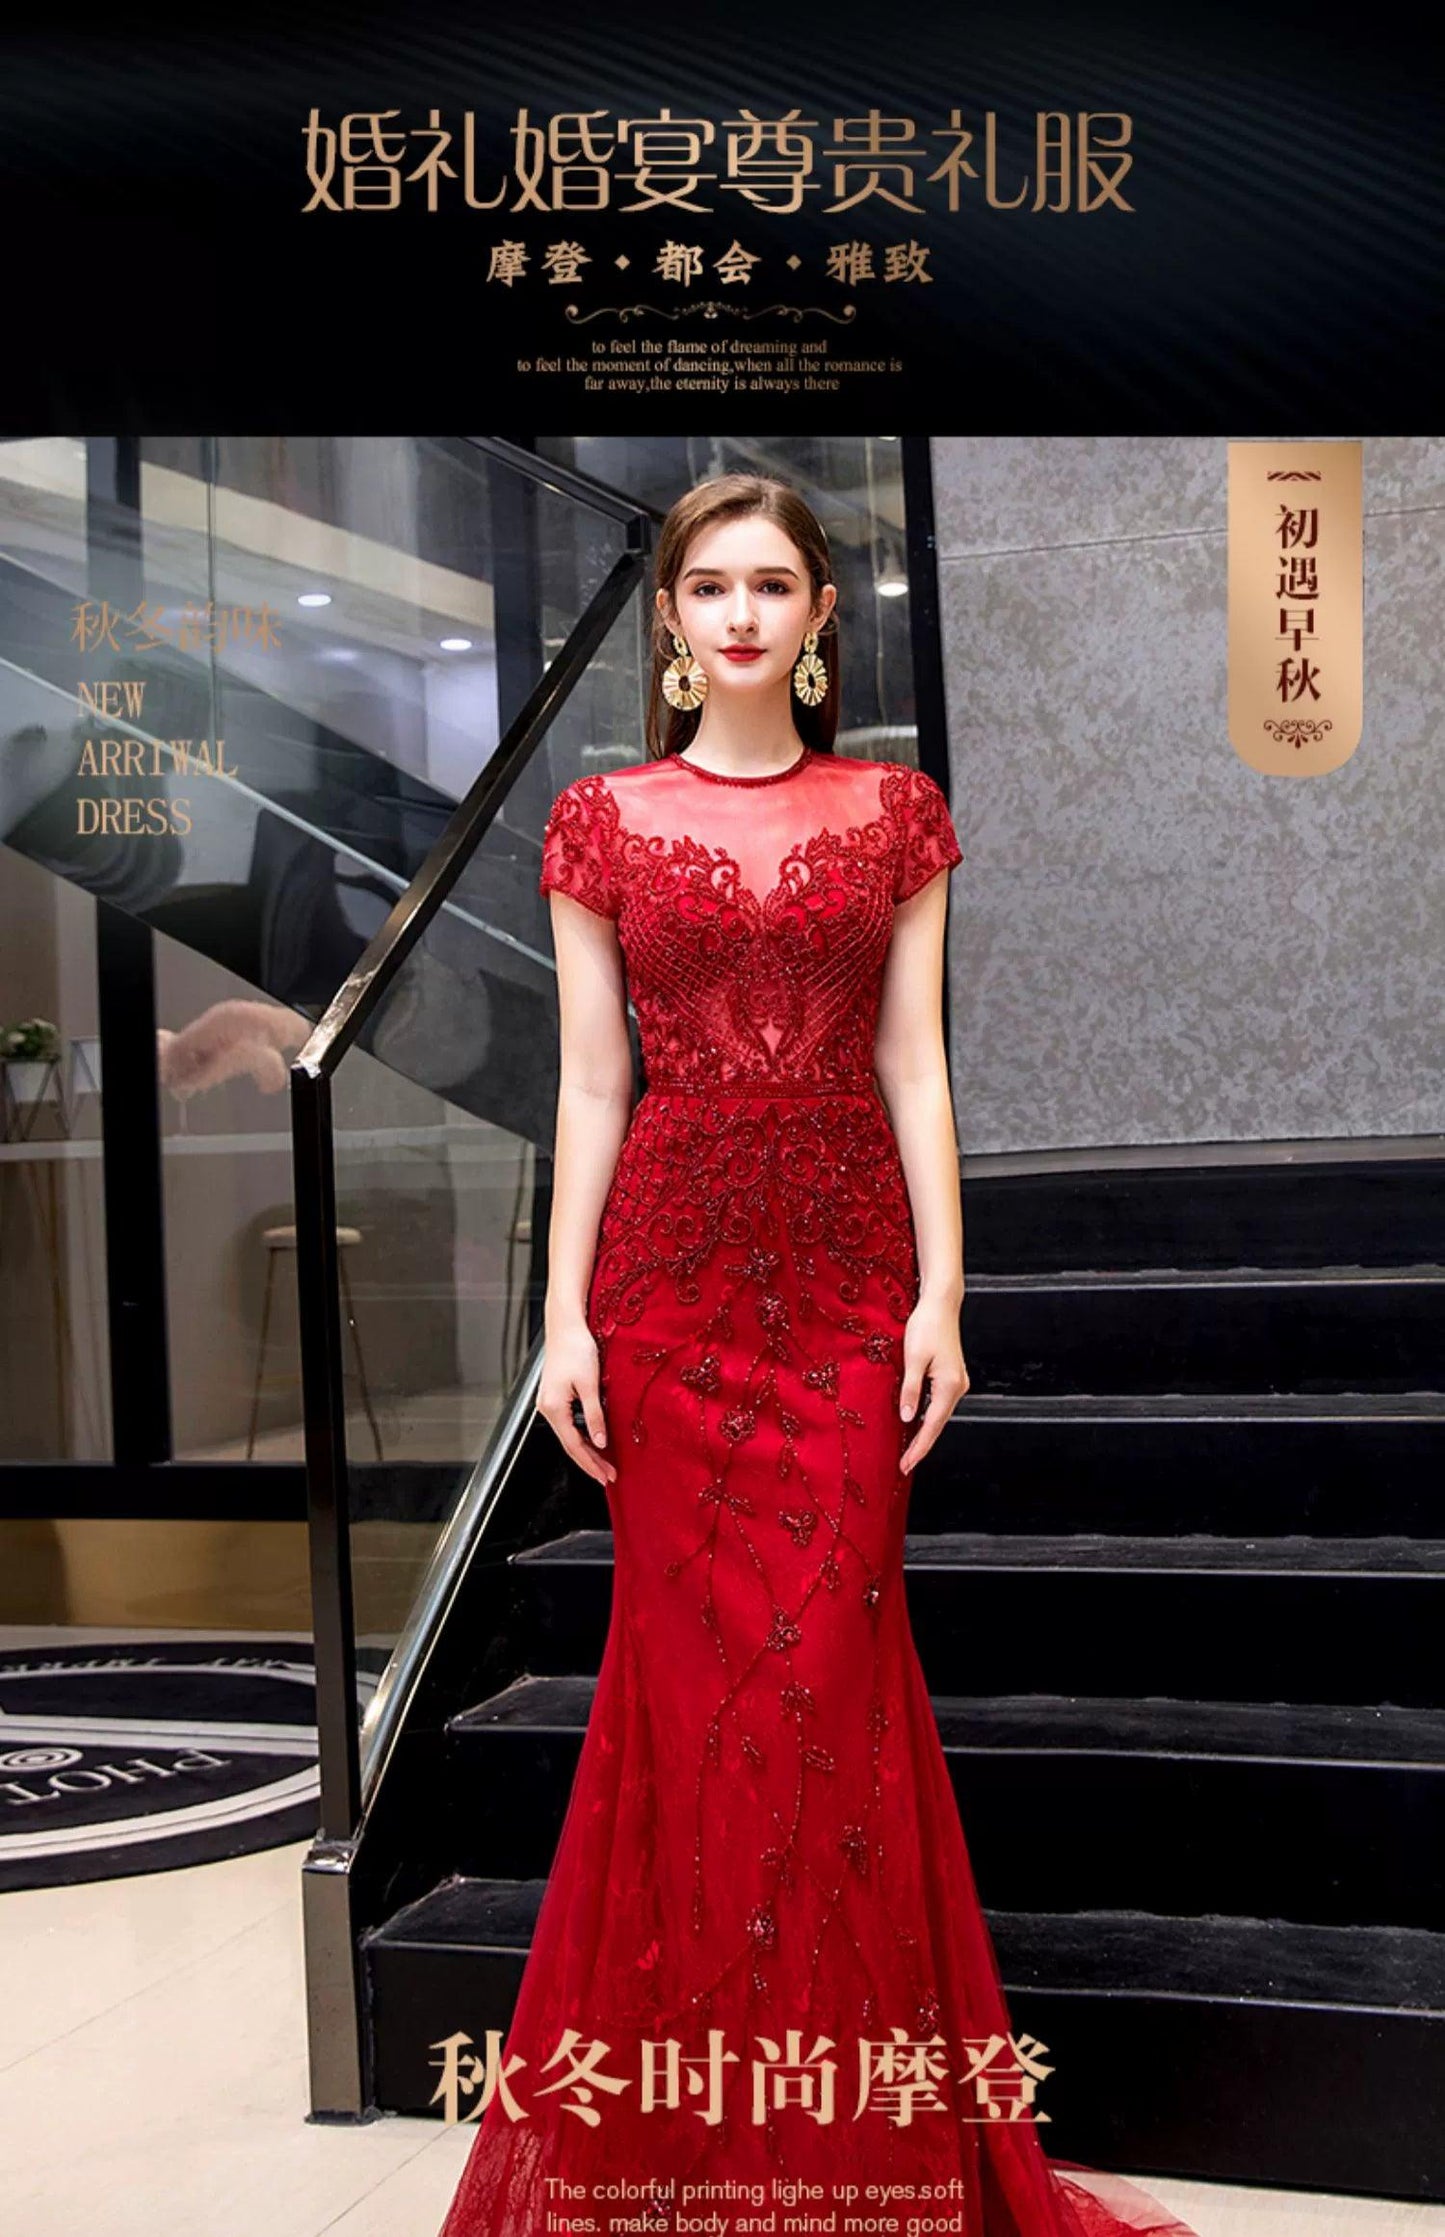 Women's Mermaid Evening Dress Sexy Lace Prom Dresses for Women Beaded Formal Dresses - numbersea